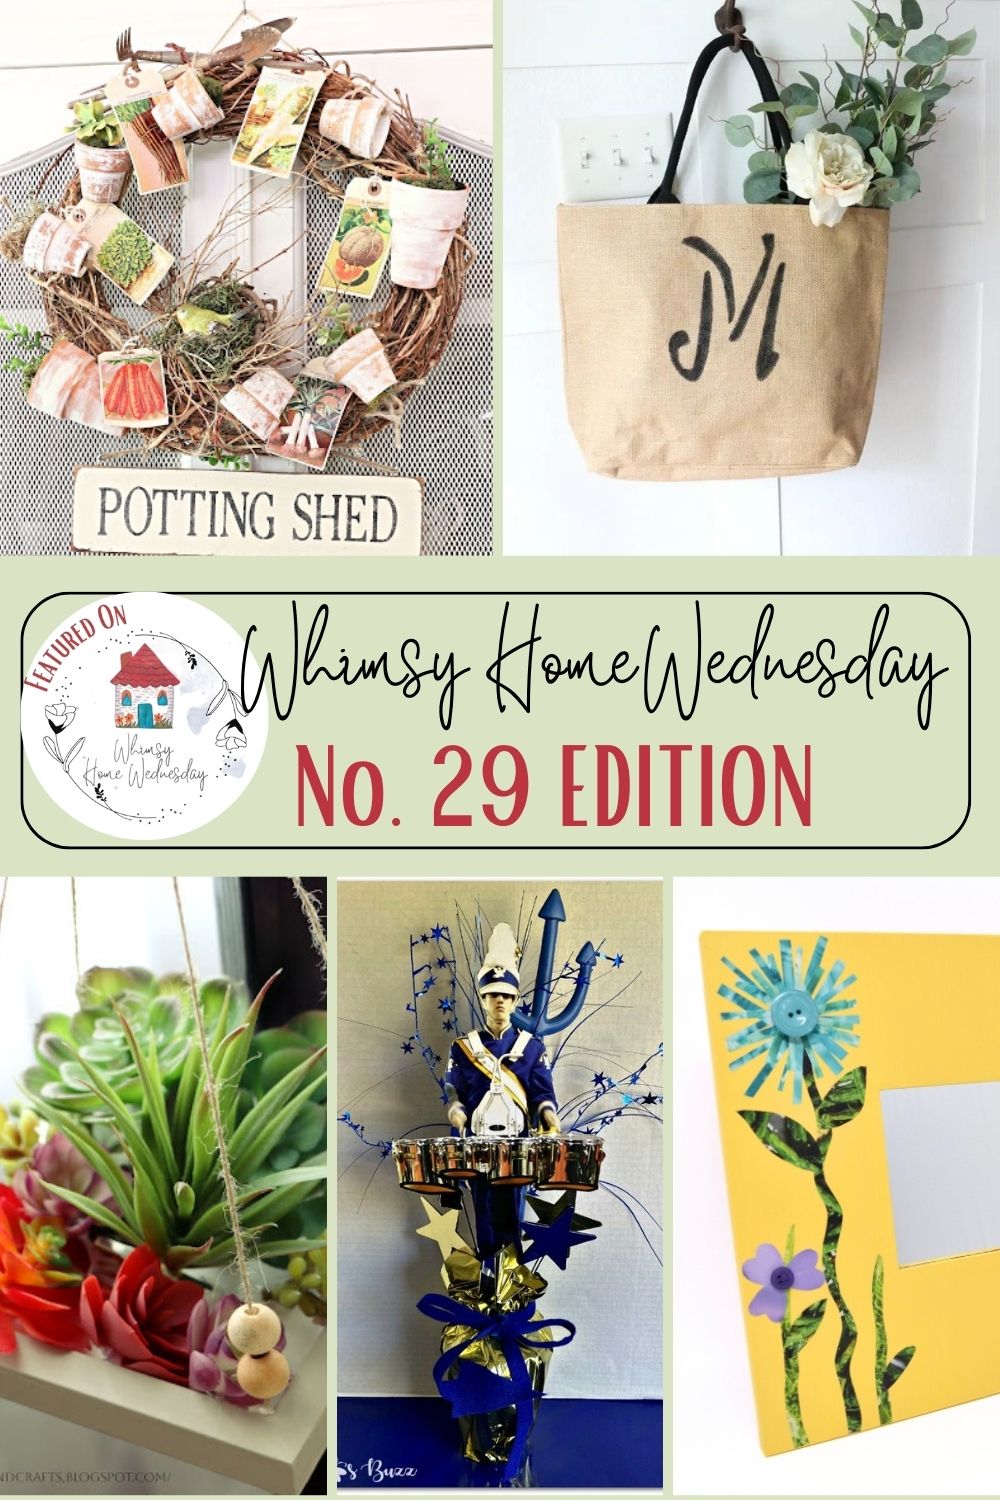 Join us on Whimsy Home Wednesday Blog Link Party No. 289and see host projects, the features from the previous week and link up your posts!